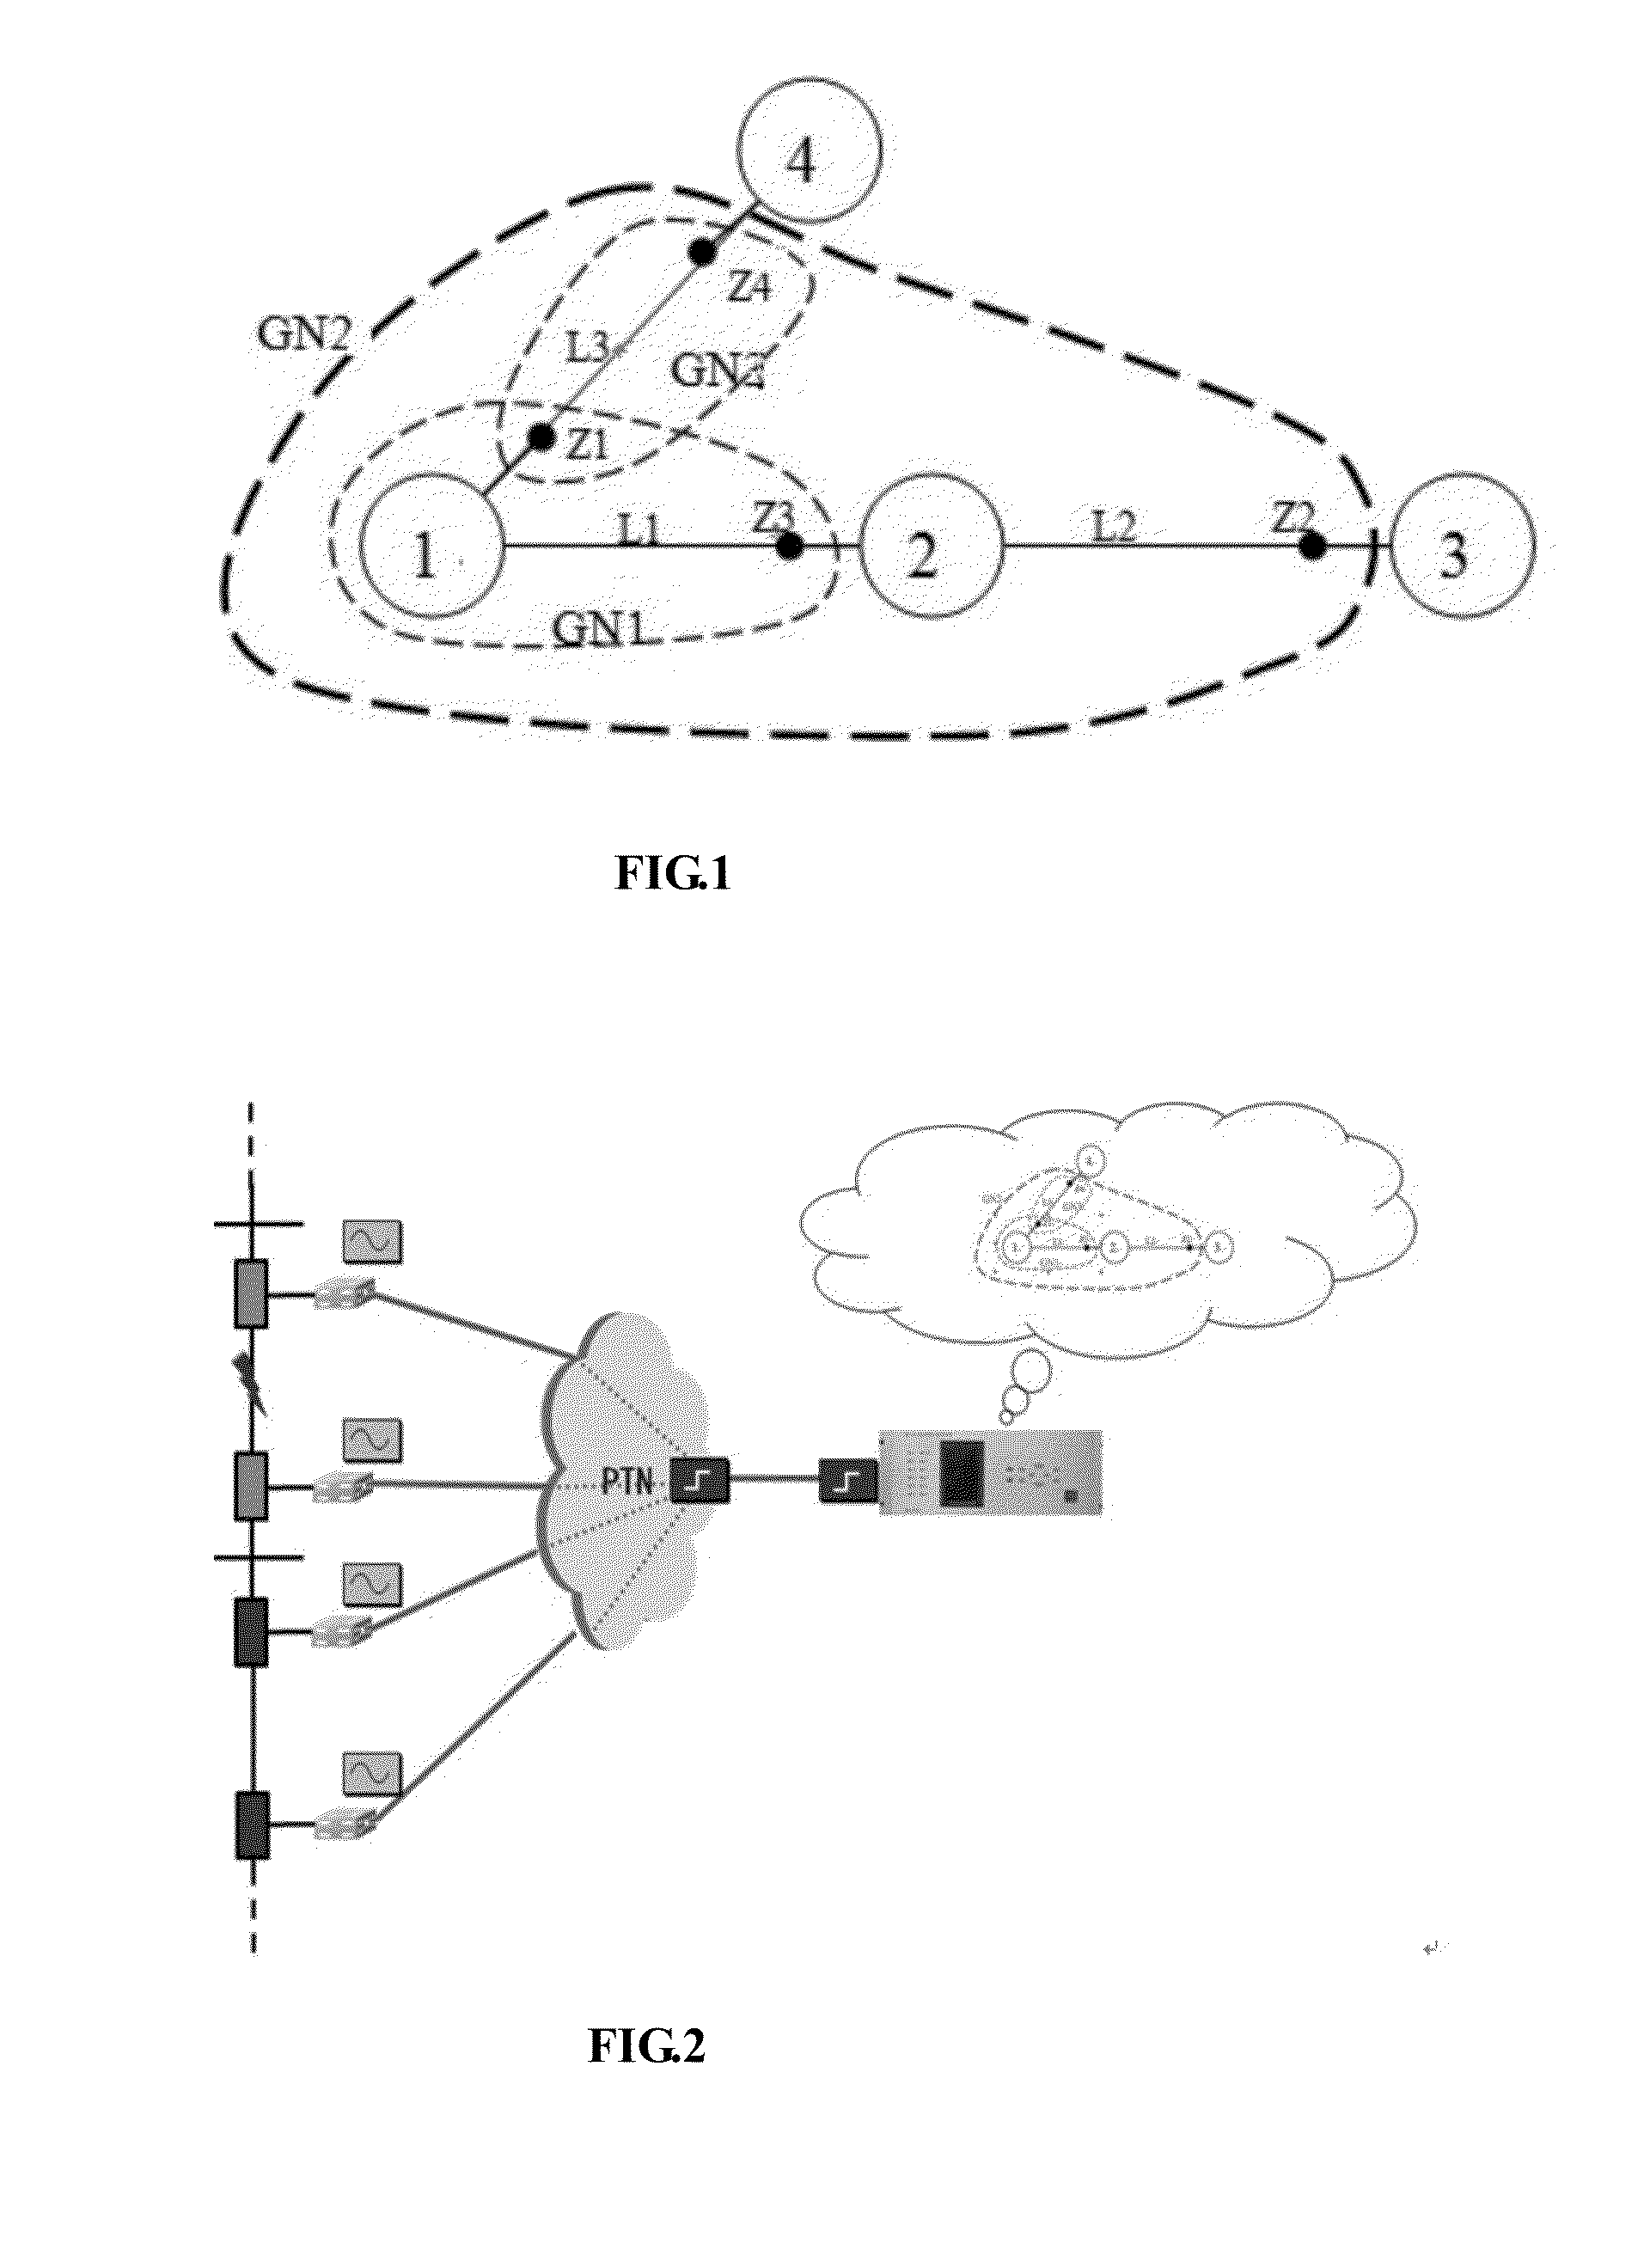 Method for generating current differential protection supernode based on electrical topology of regional distribution network